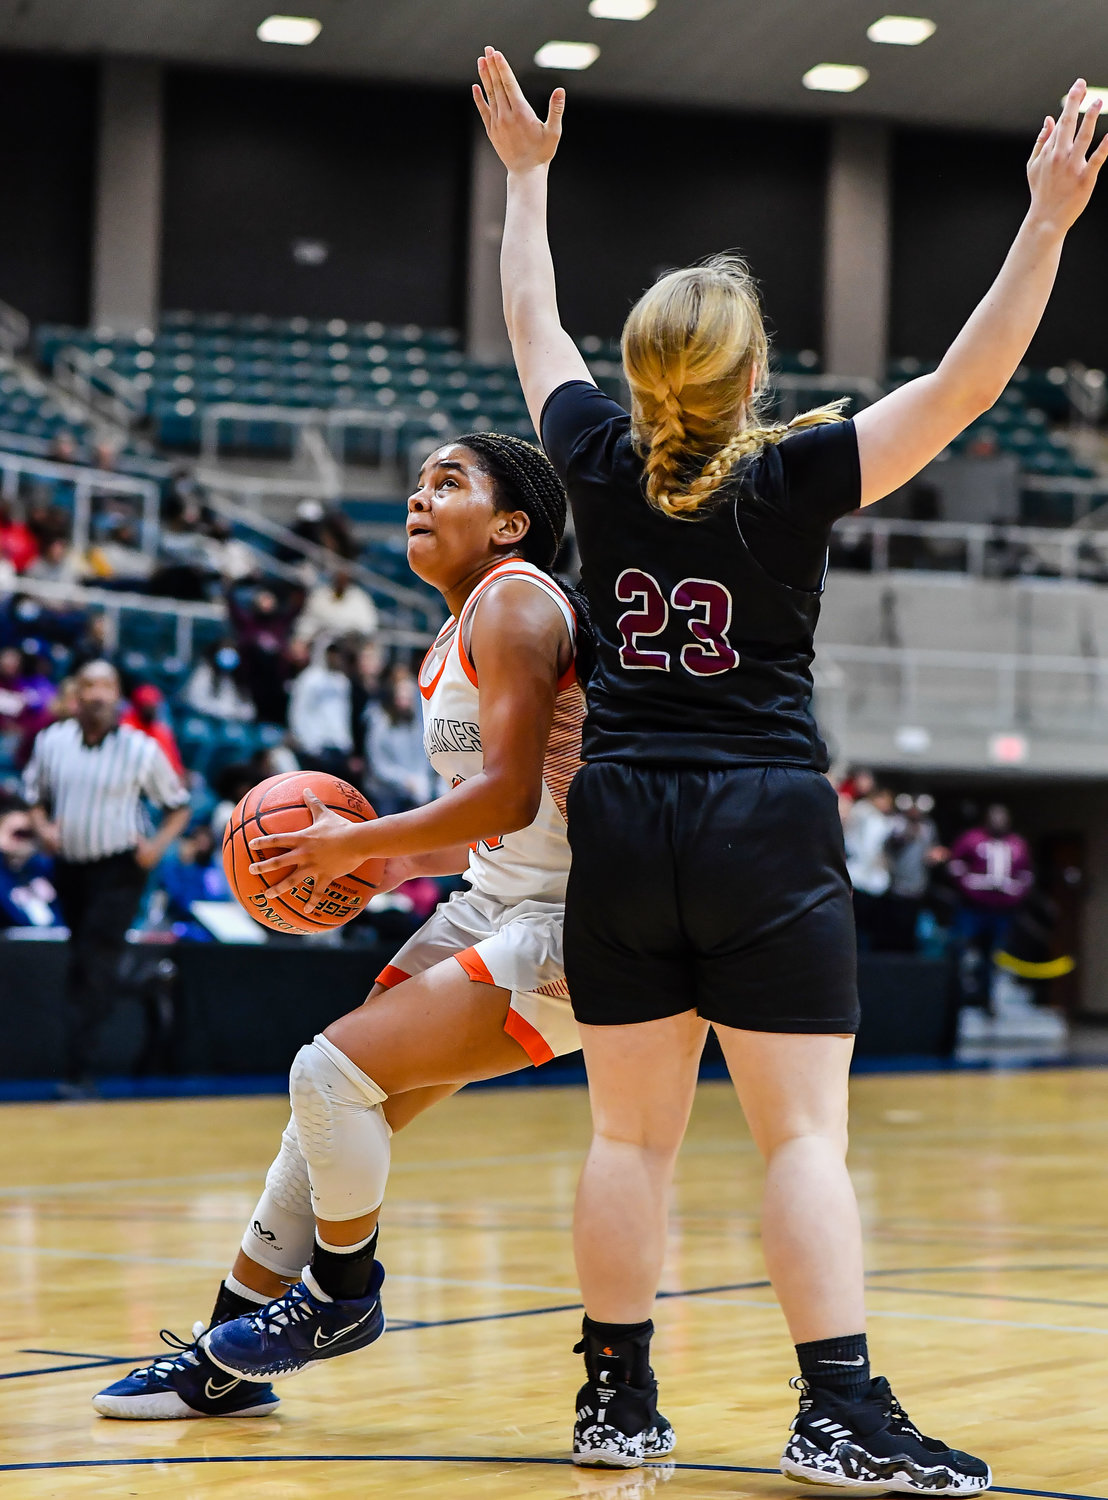 Katy Tx. Feb 25, 2022:  Seven Lakes Lenore Hudspeth #23 drives around Pearlands Lauren Smith #23 to the basket during the Regional SemiFinal playoff game, Seven Lakes vs Pearland at the Merrell Center. (Photo by Mark Goodman / Katy Times)